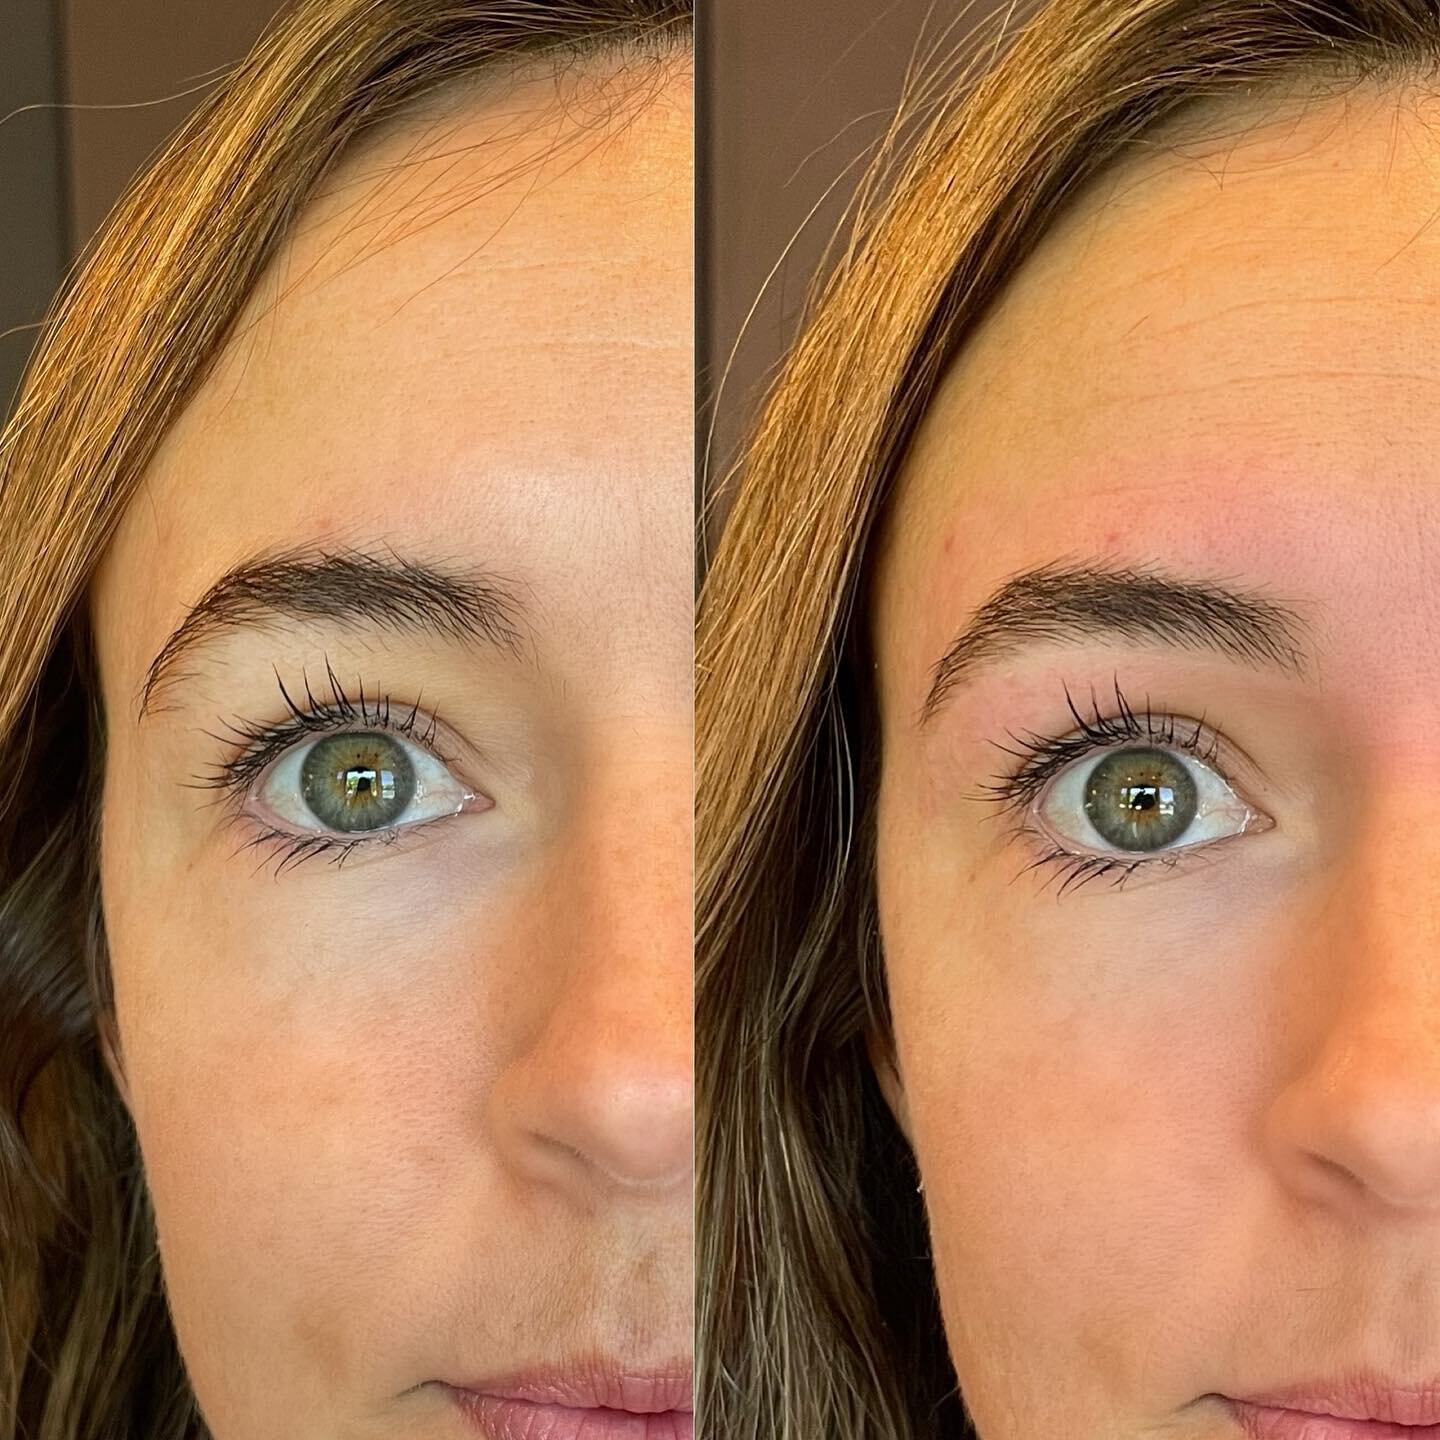 Whether you&rsquo;re starting with lots or little brow, our methods can help you achieve your best natural shape without the need for permanent makeup. Taking just the right hairs makes all the difference on maximizing this beautiful client&rsquo;s b